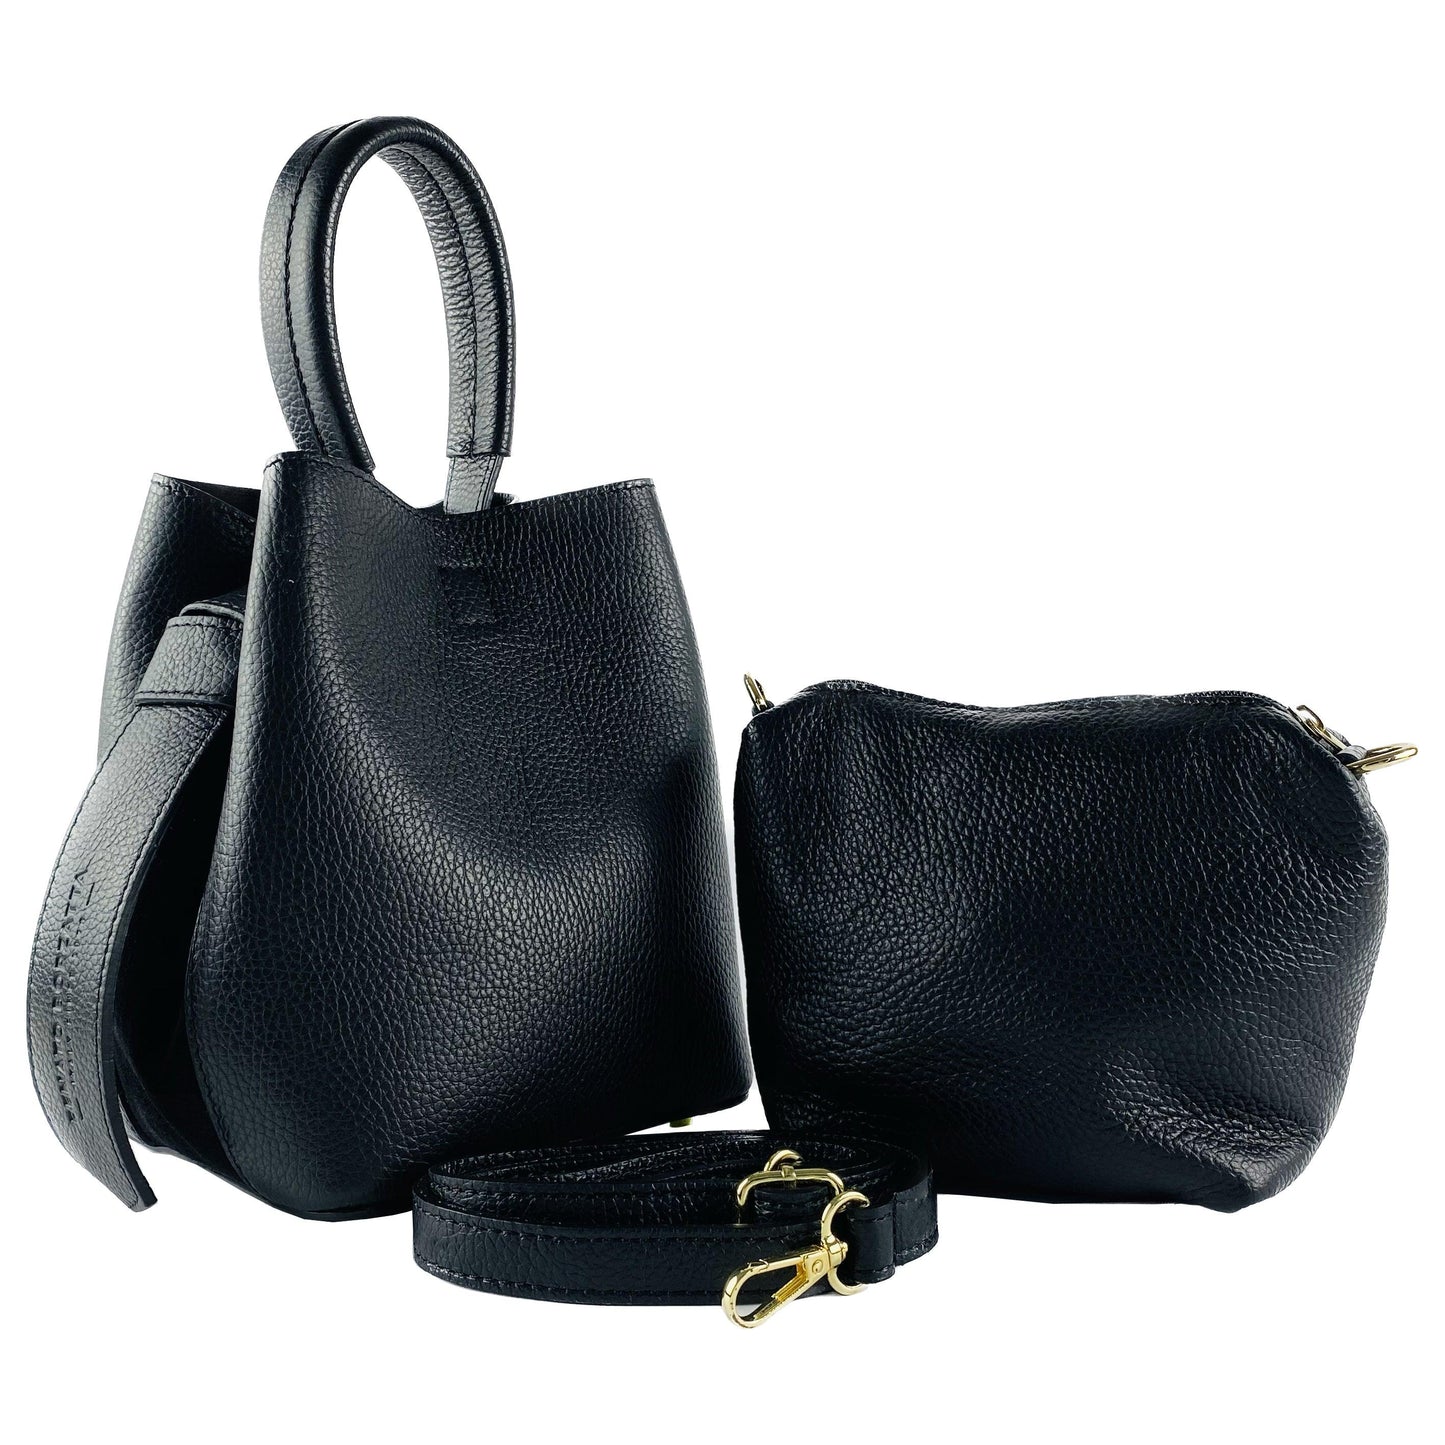 RB1006A | Women's Bucket Bag with Shoulder Bag in Genuine Leather | 16 x 14 x 21 cm-0